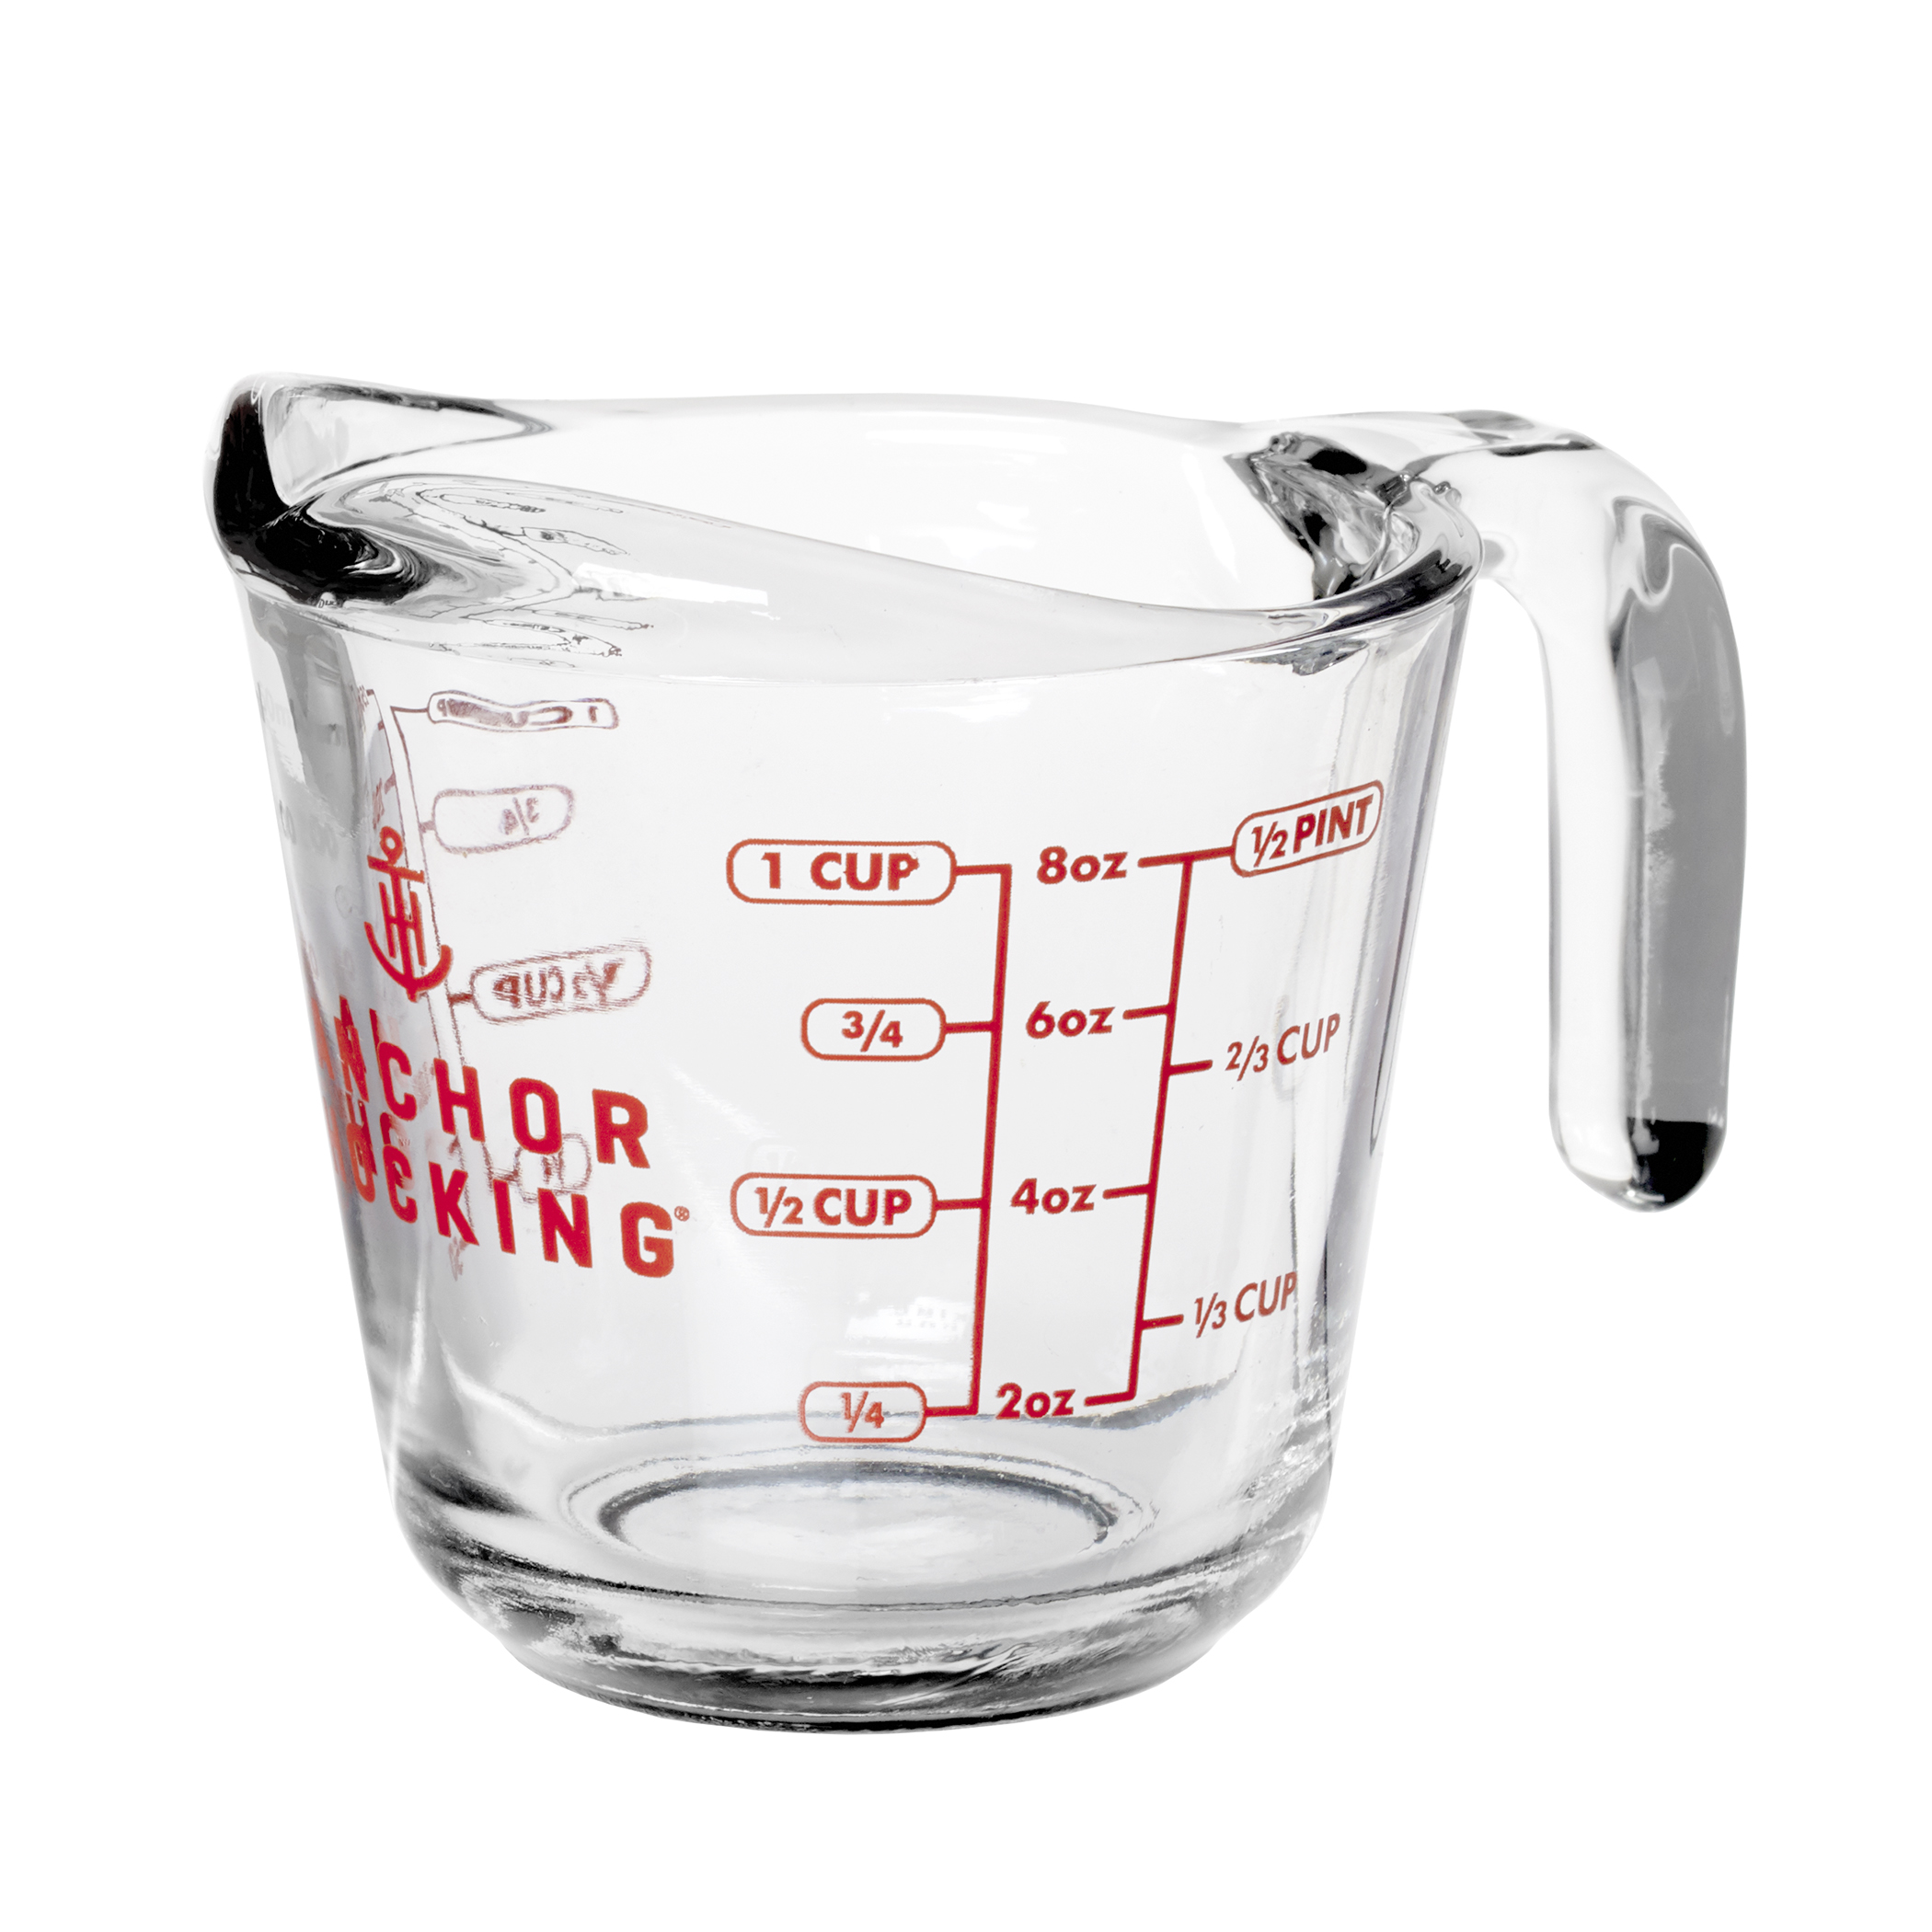 Anchor Hocking Glass Measuring Cup, 1 Cup - image 1 of 7